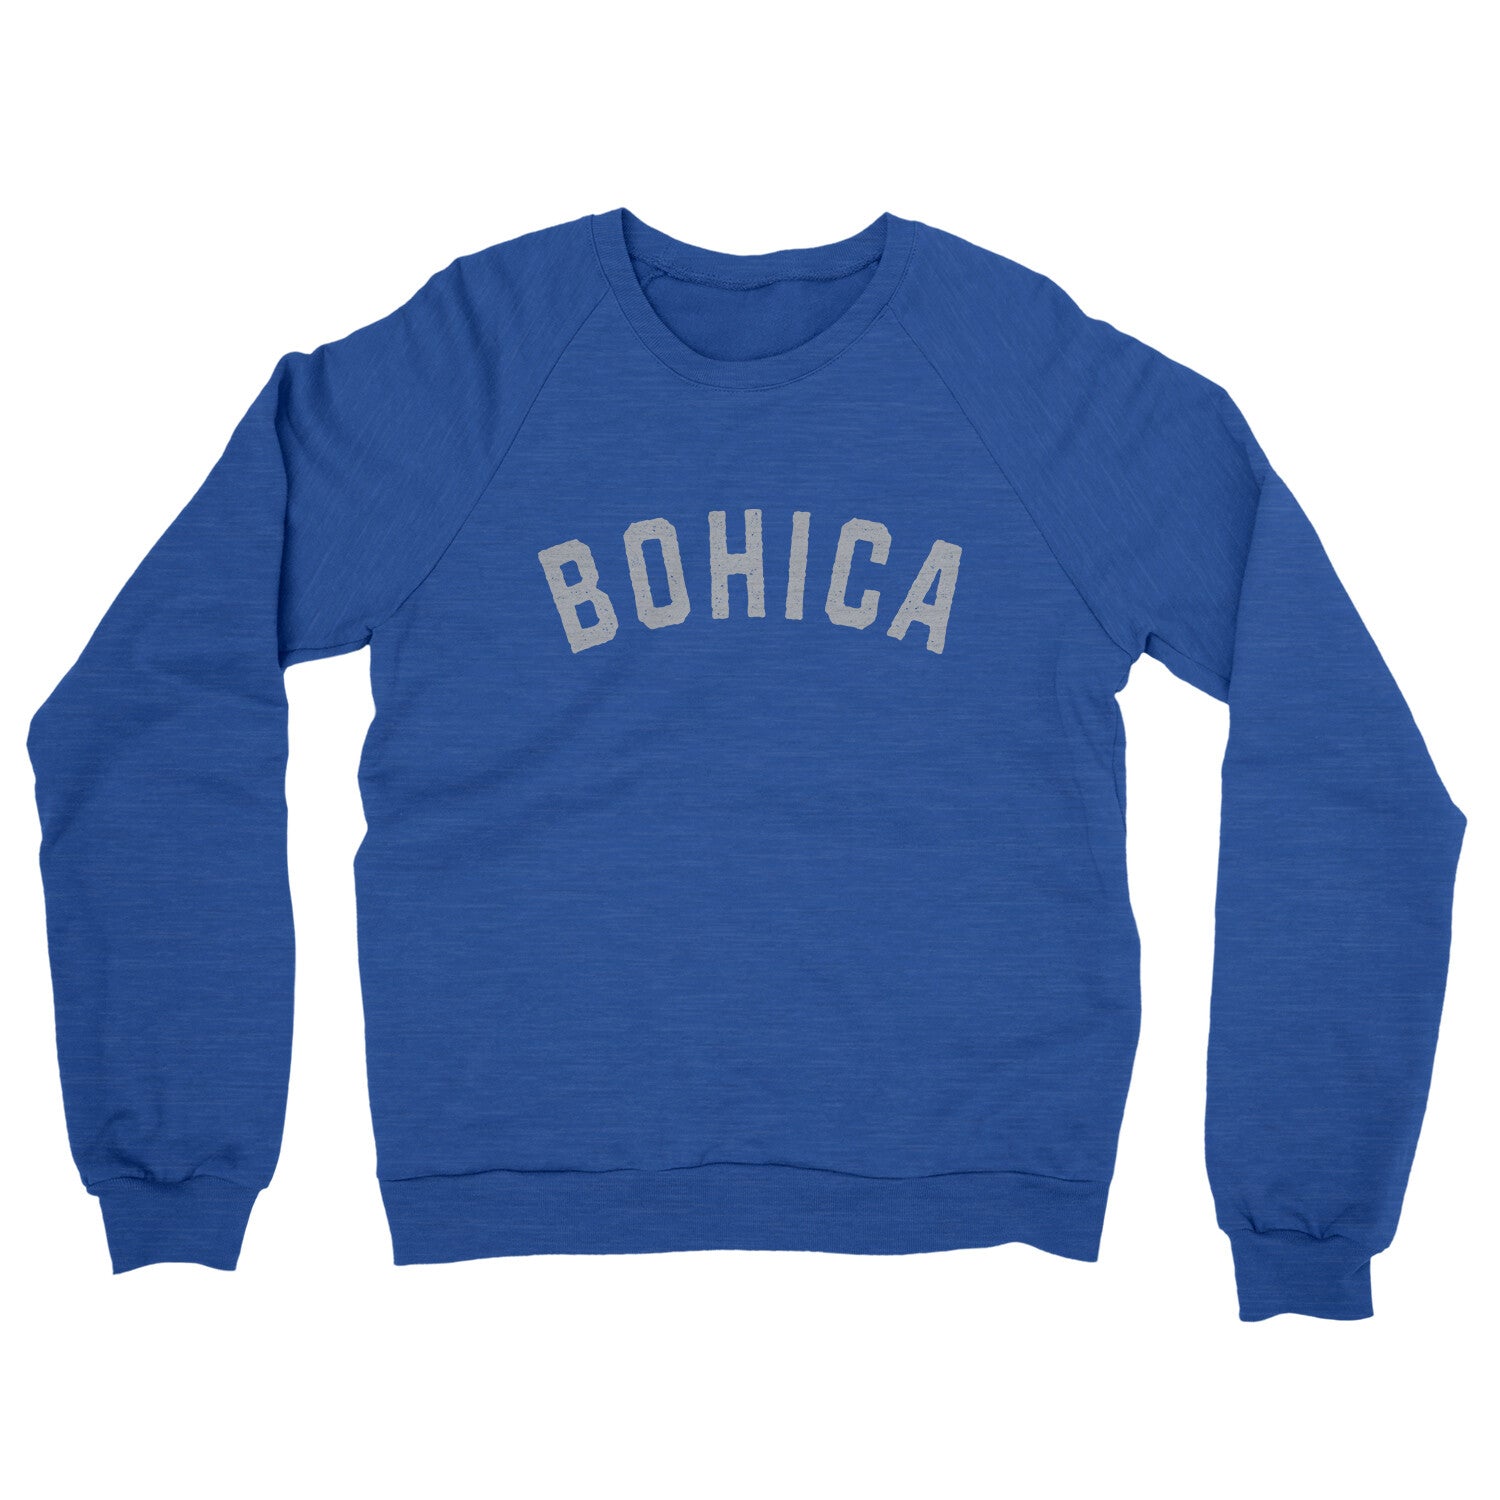 Bohica in Heather Royal Color